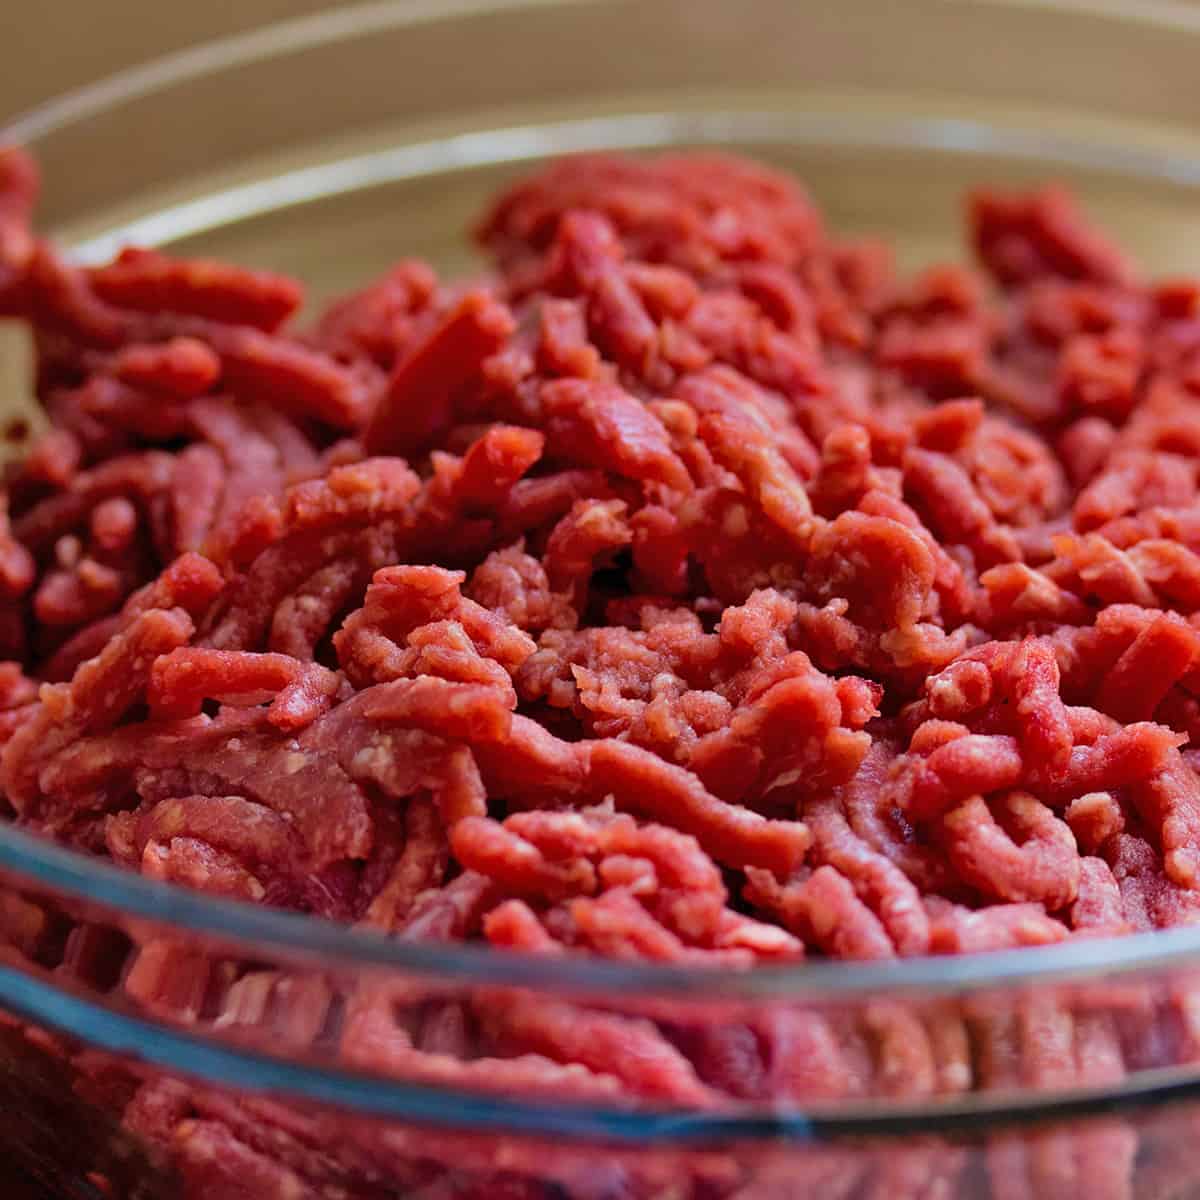 How to Boil Ground Beef for the Freezer - The Purposeful Pantry